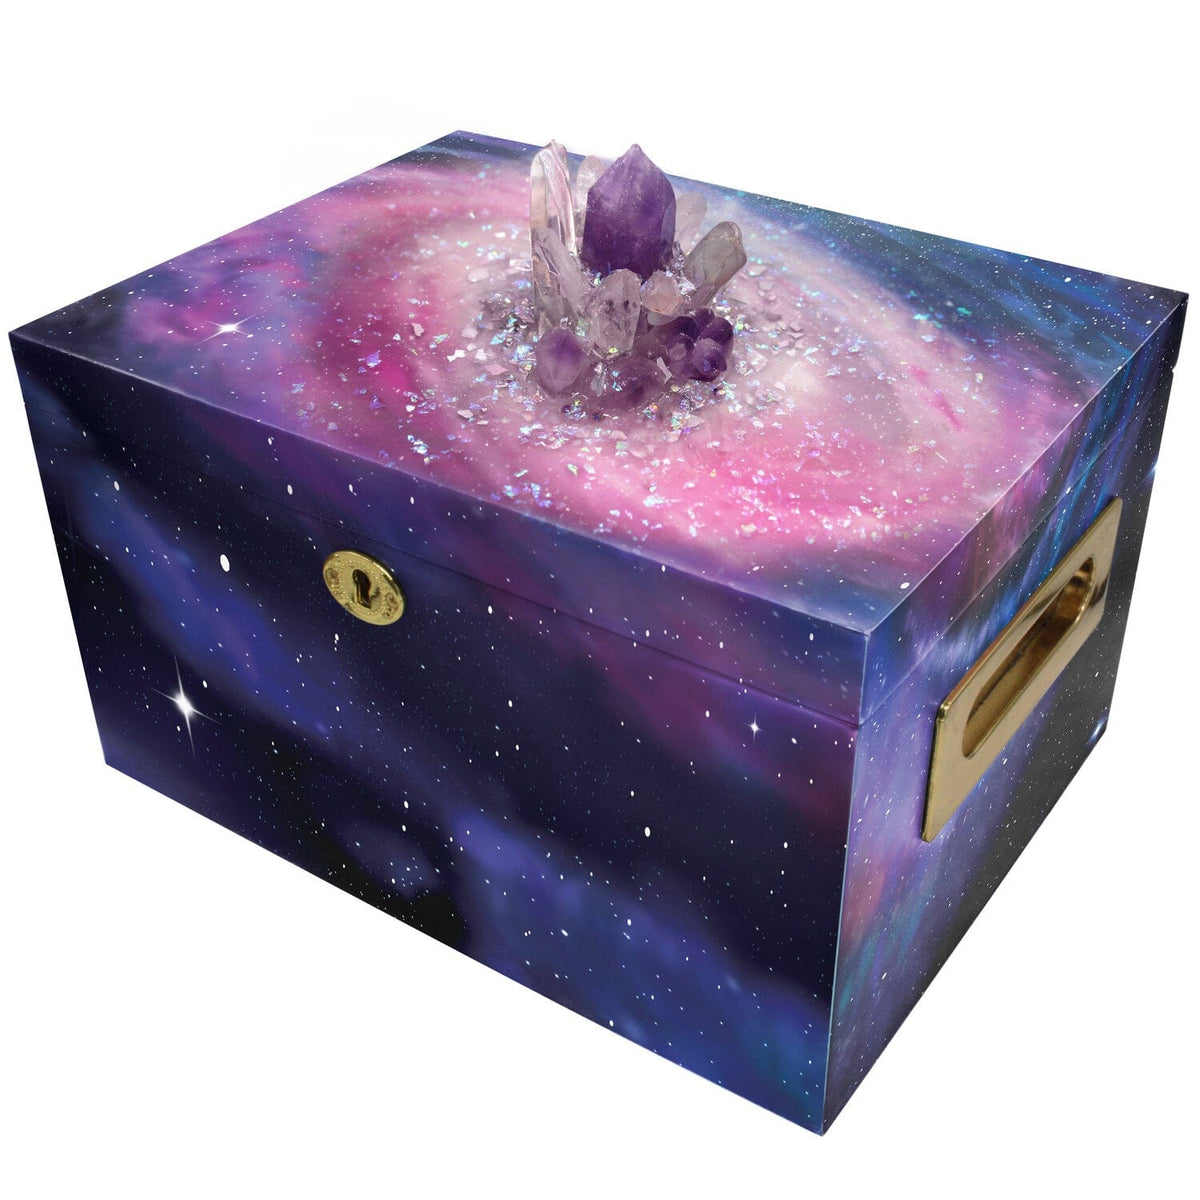 Commemorative Cremation Urns Limited Edition Crystal Galaxy with Genuine Amethyst and Quartz Memorial Collection Chest Cremation Urn